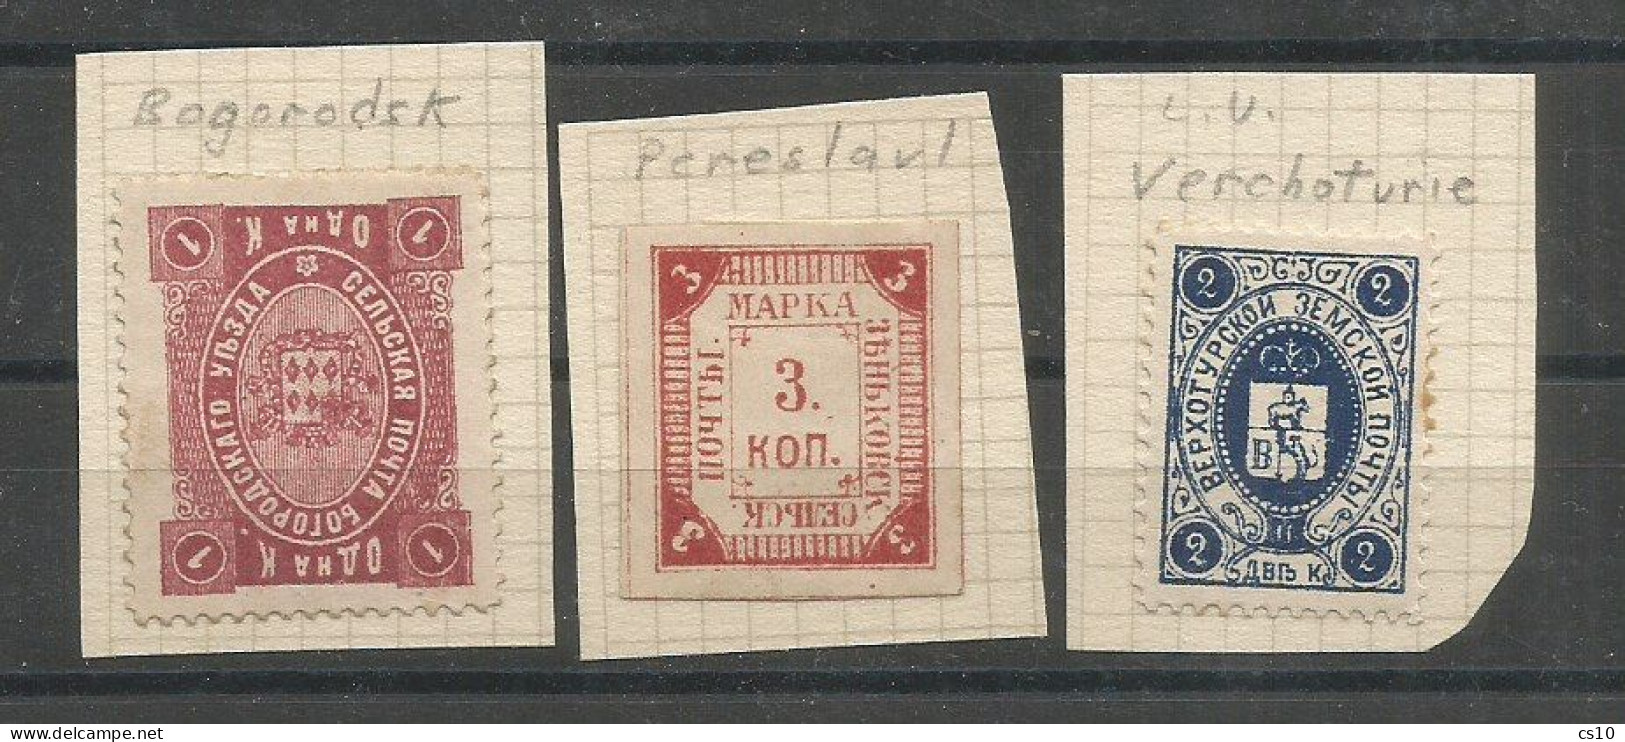 Old Russia Empire & Area #13 Scans Study Lot Of 490 Pcs Mint/Used Including Suomi Finland Levant, Some Piece, Imperf - Oblitérés